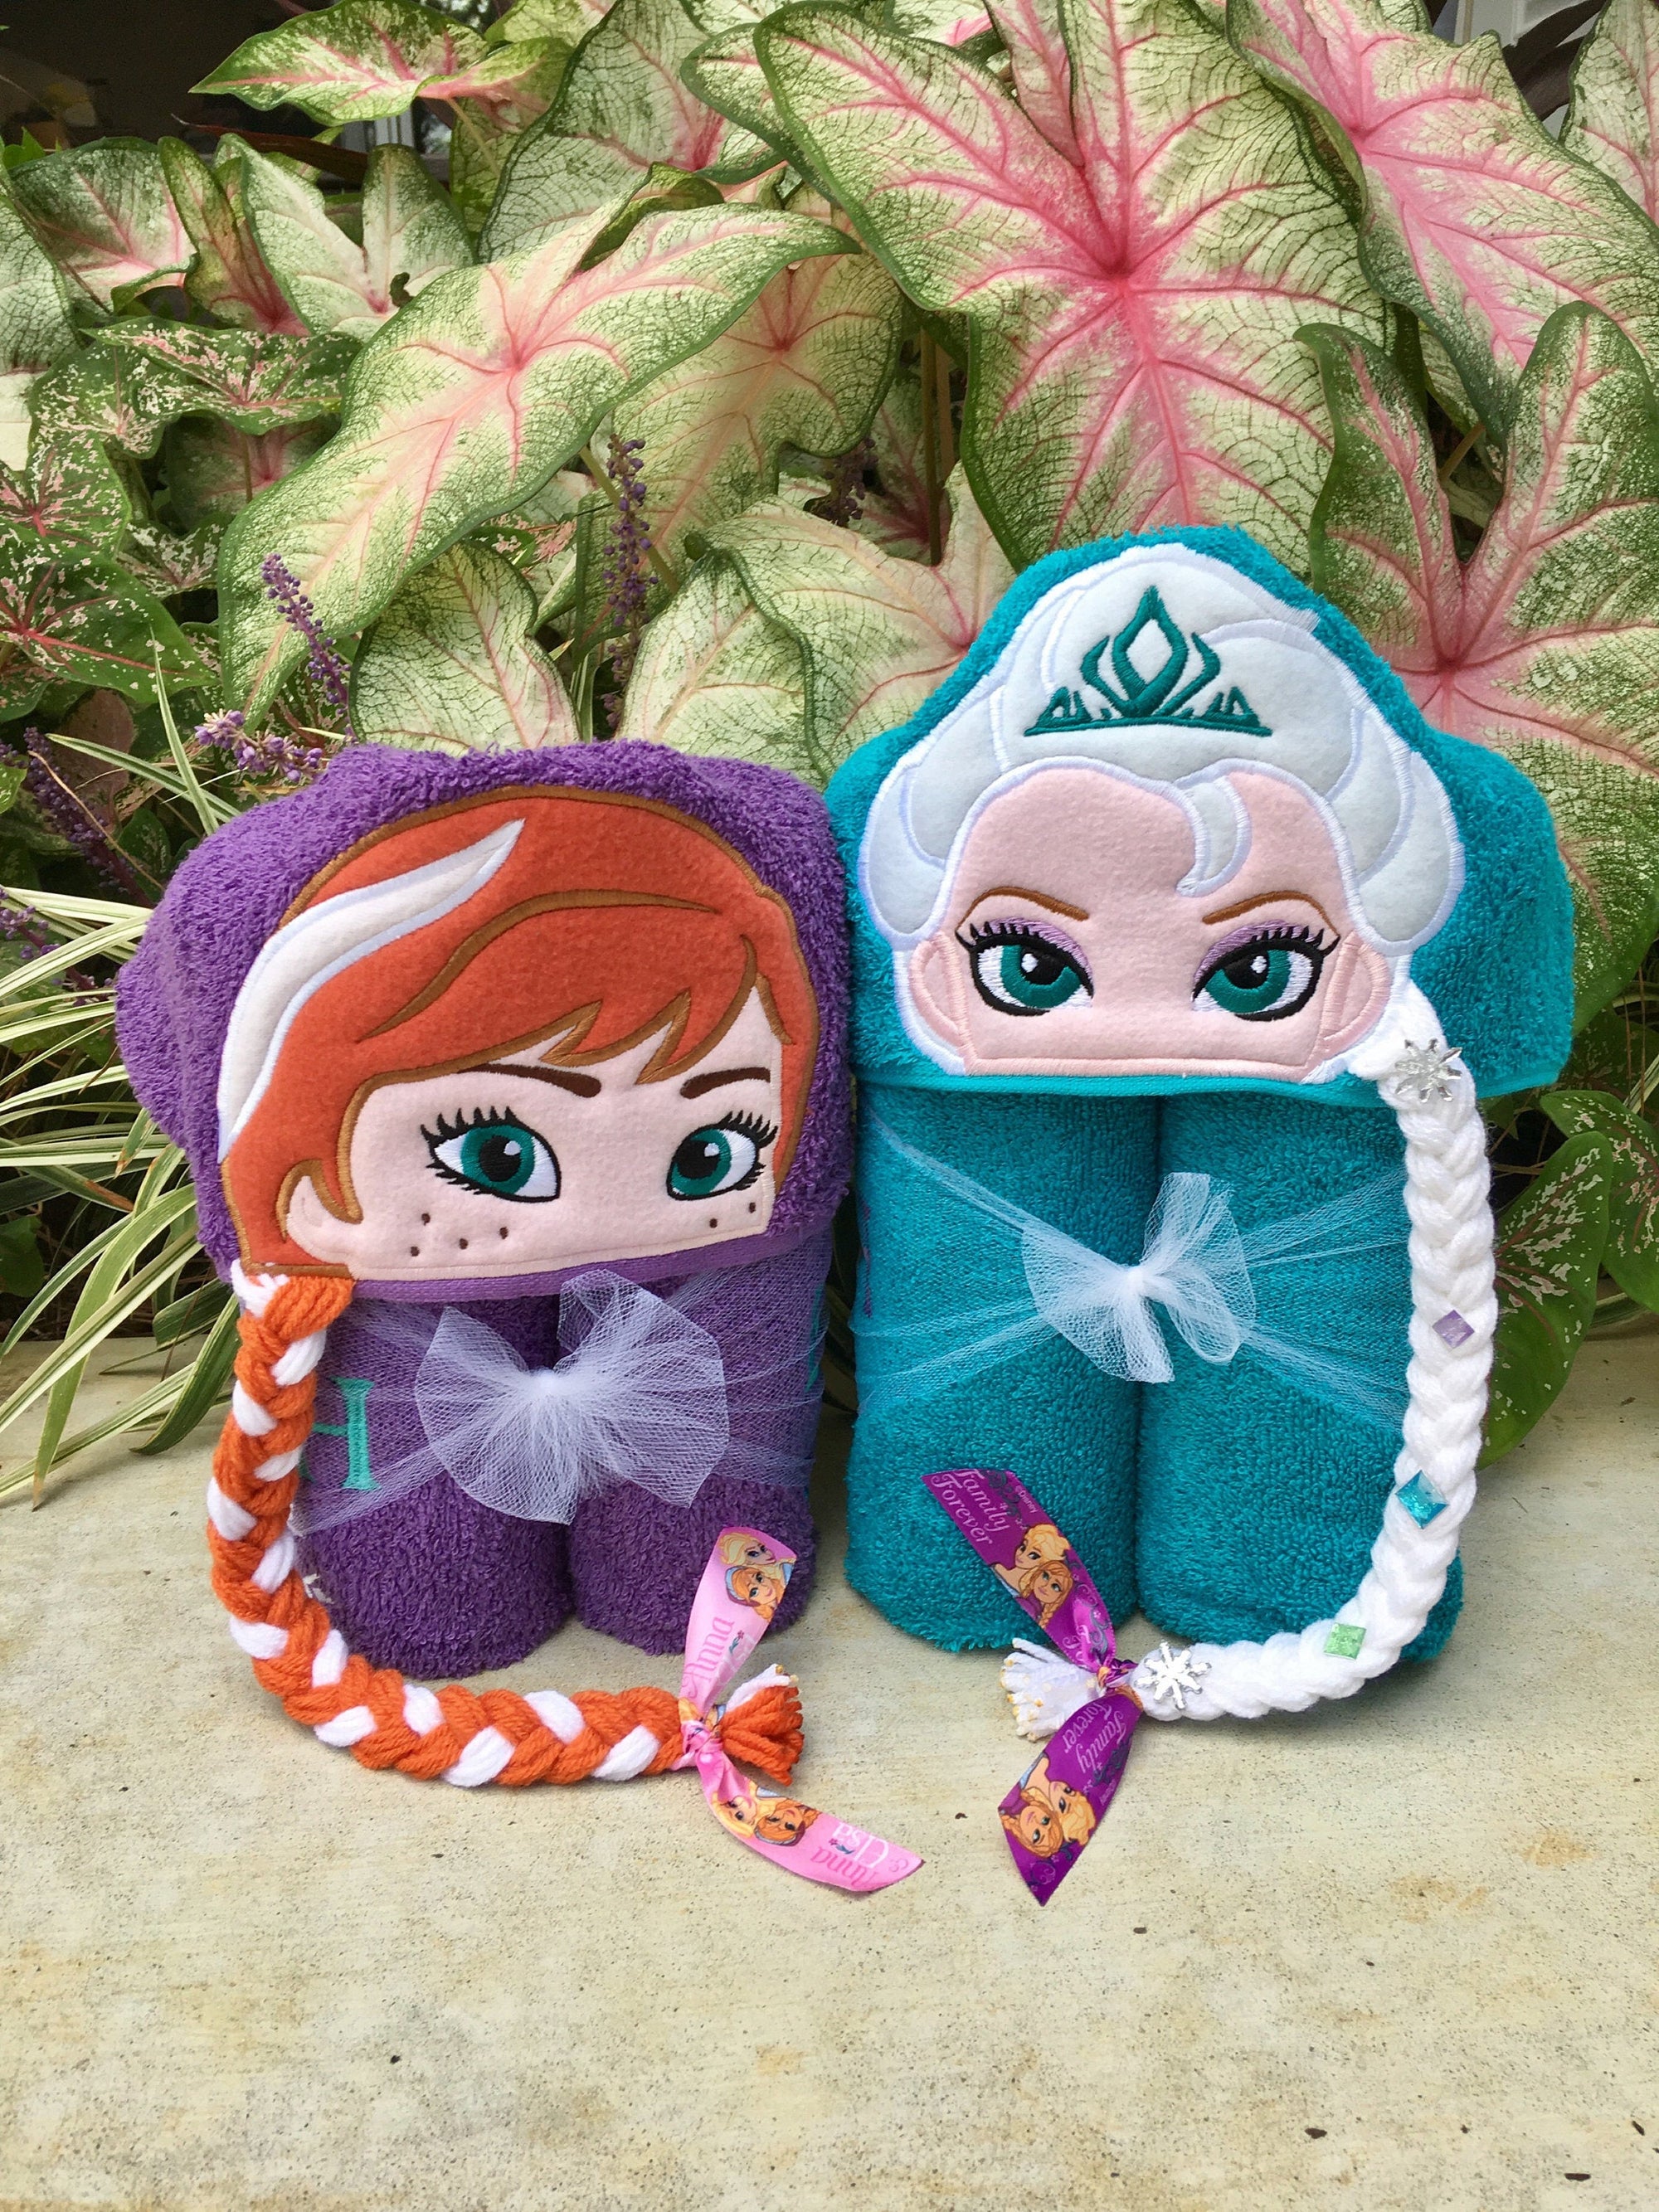 Personalized Elsa & Anna Inspired Hooded Towel